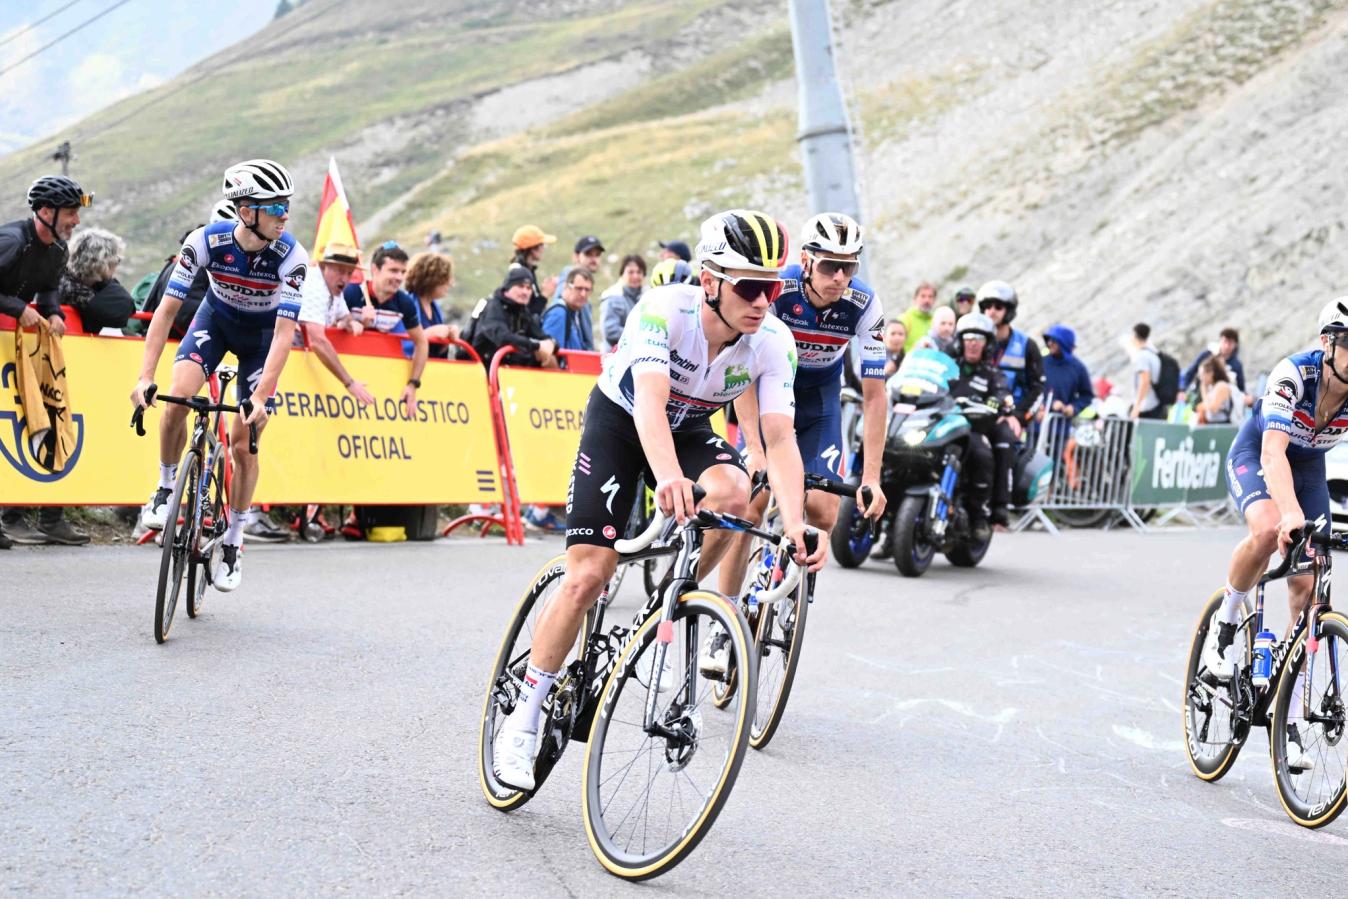 Remco Evenepoel left last year's Giro d'Italia with Covid and fell victim to a bad day on the Col du Tourmalet at the Vuelta a España 